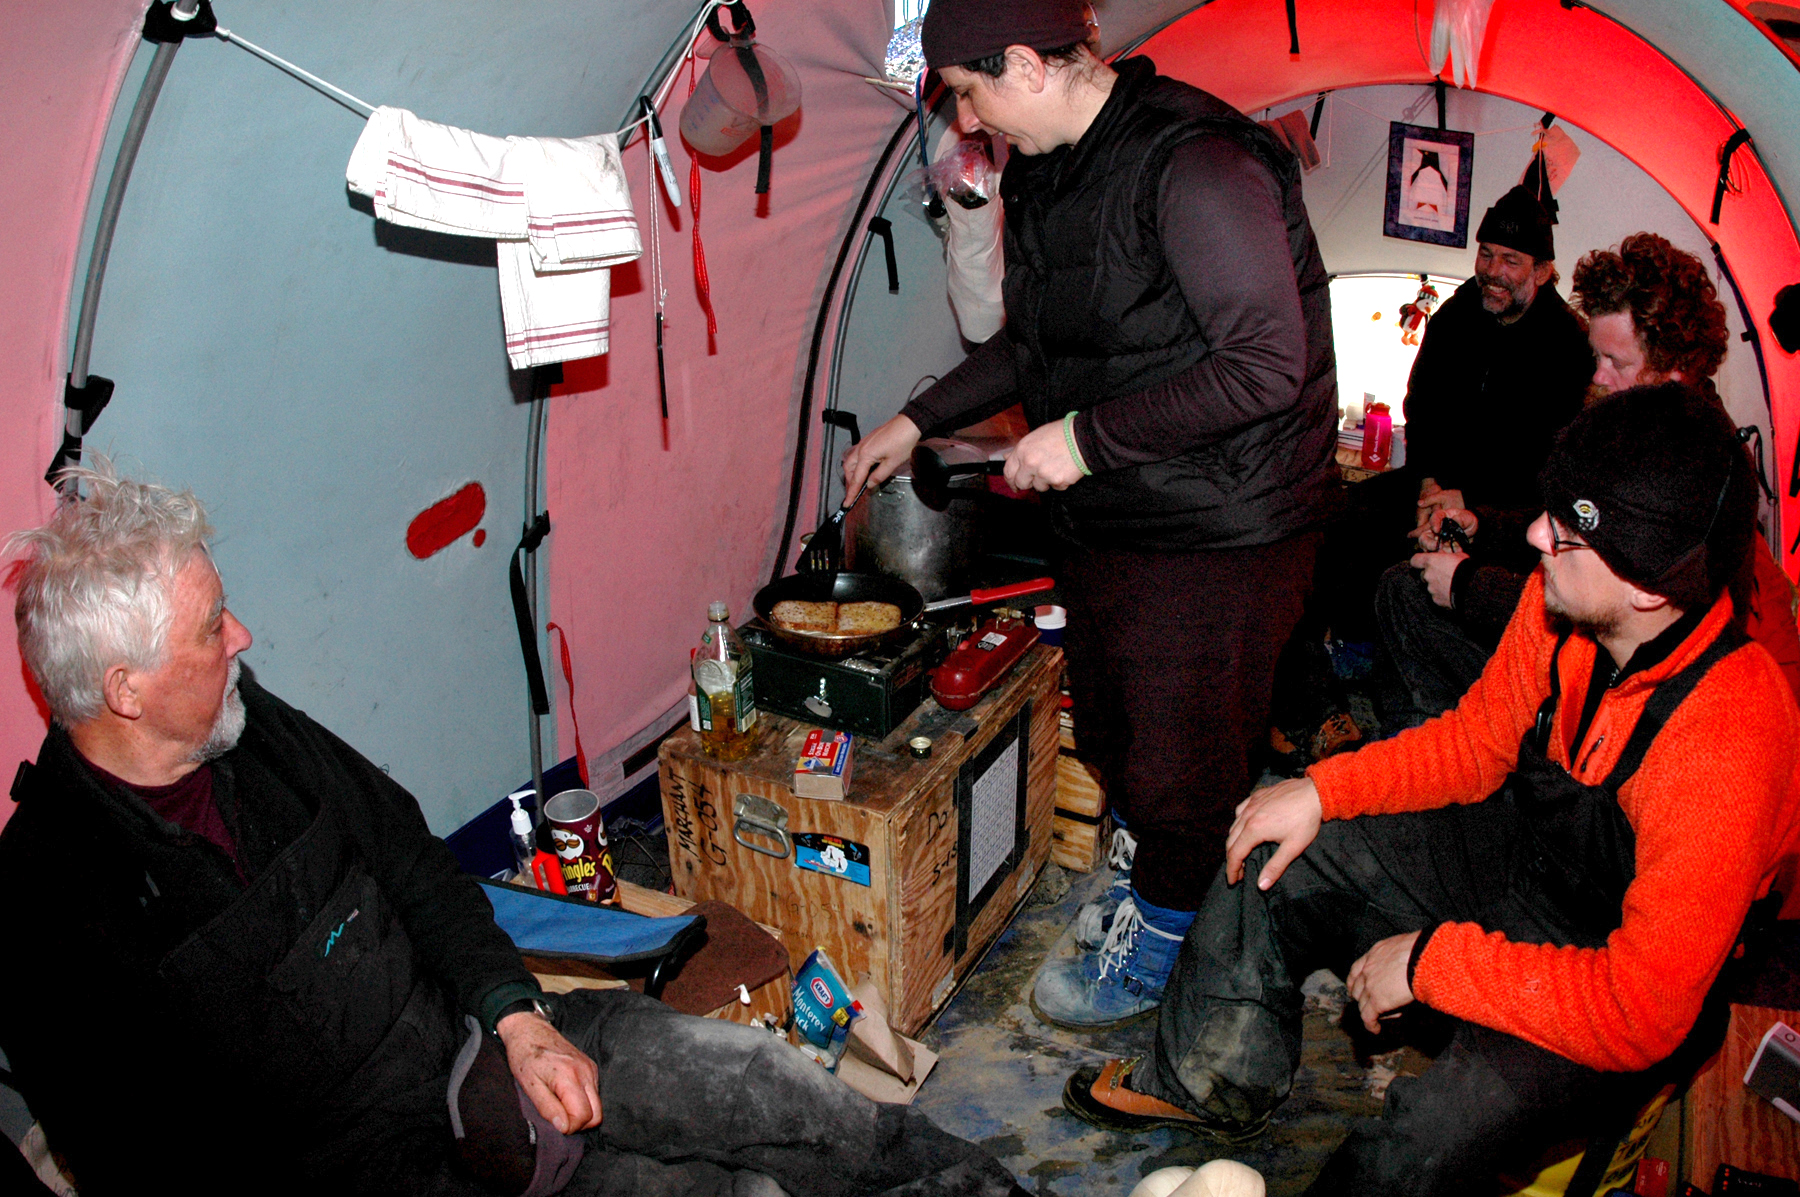 Several people in tent; one cooking.